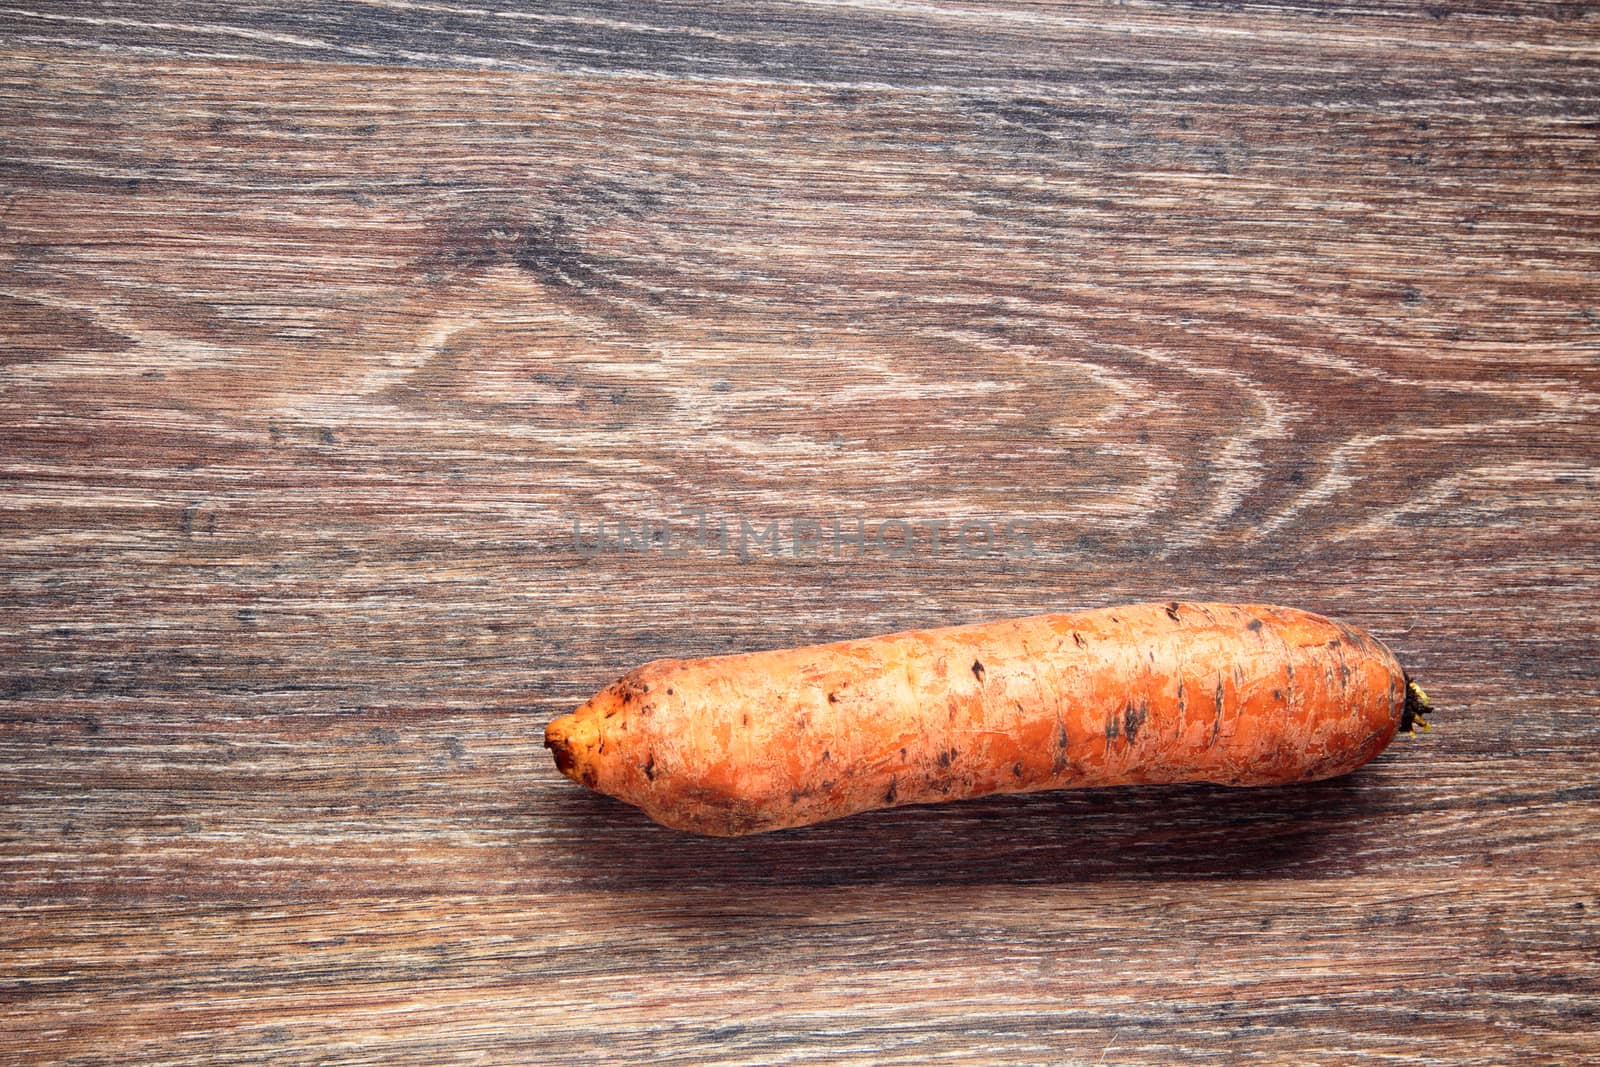 carrot on wood. Top View on wooden table with Copy Space. Ingredients for 